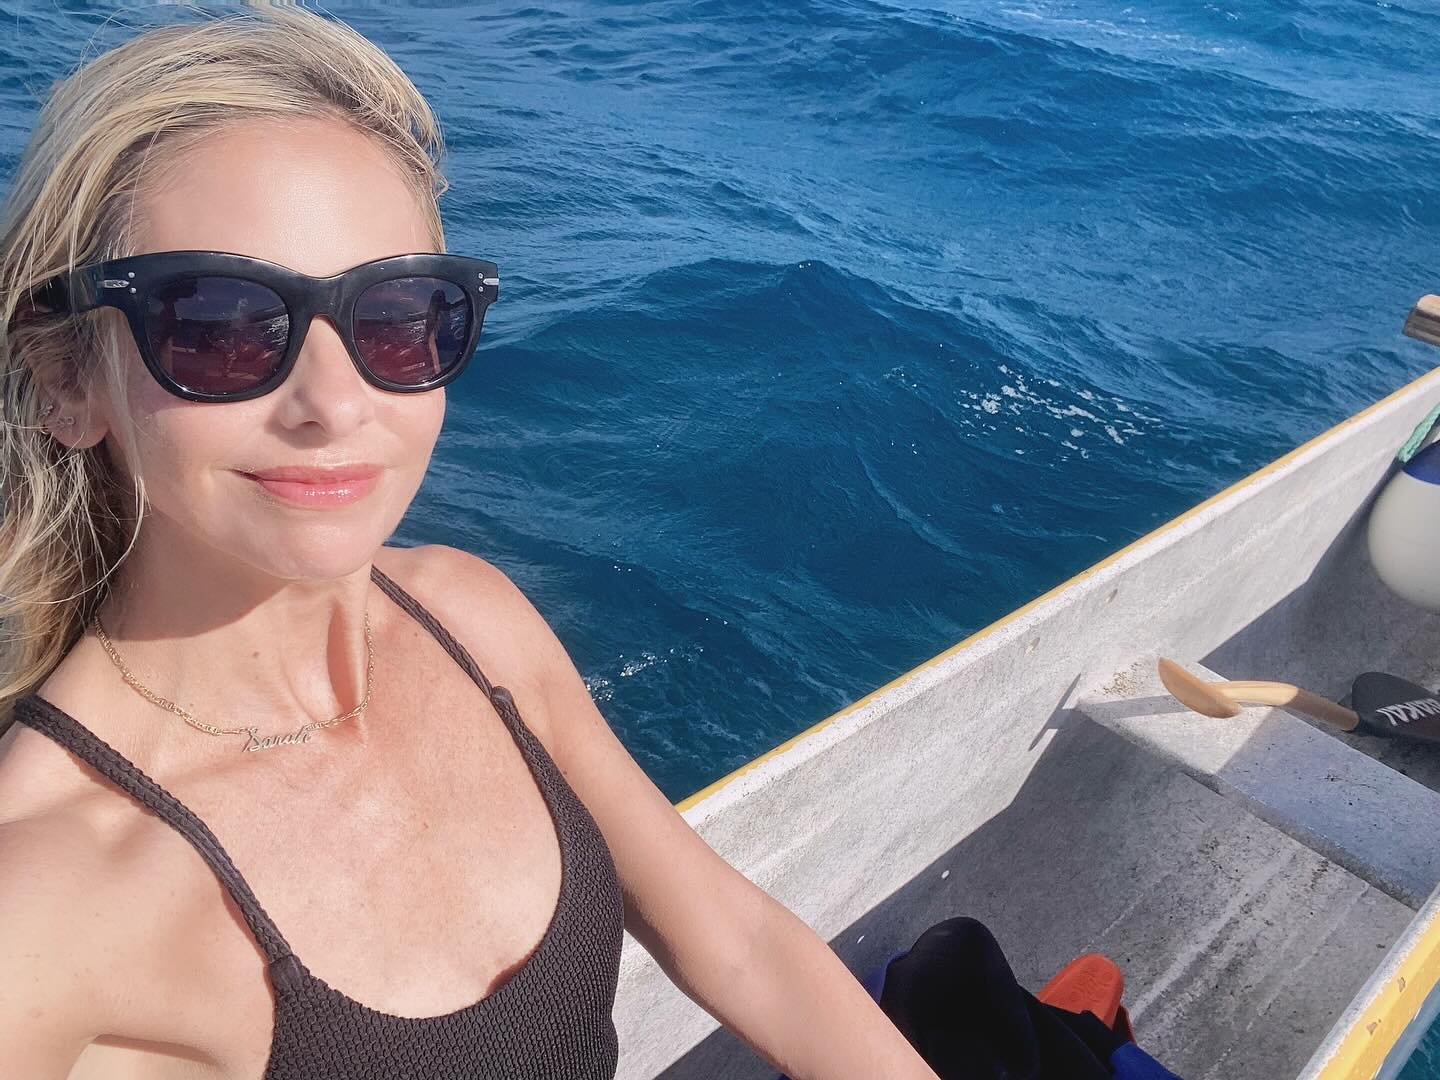 Sarah Michelle Gellar has been treating fans to plenty of vacation content